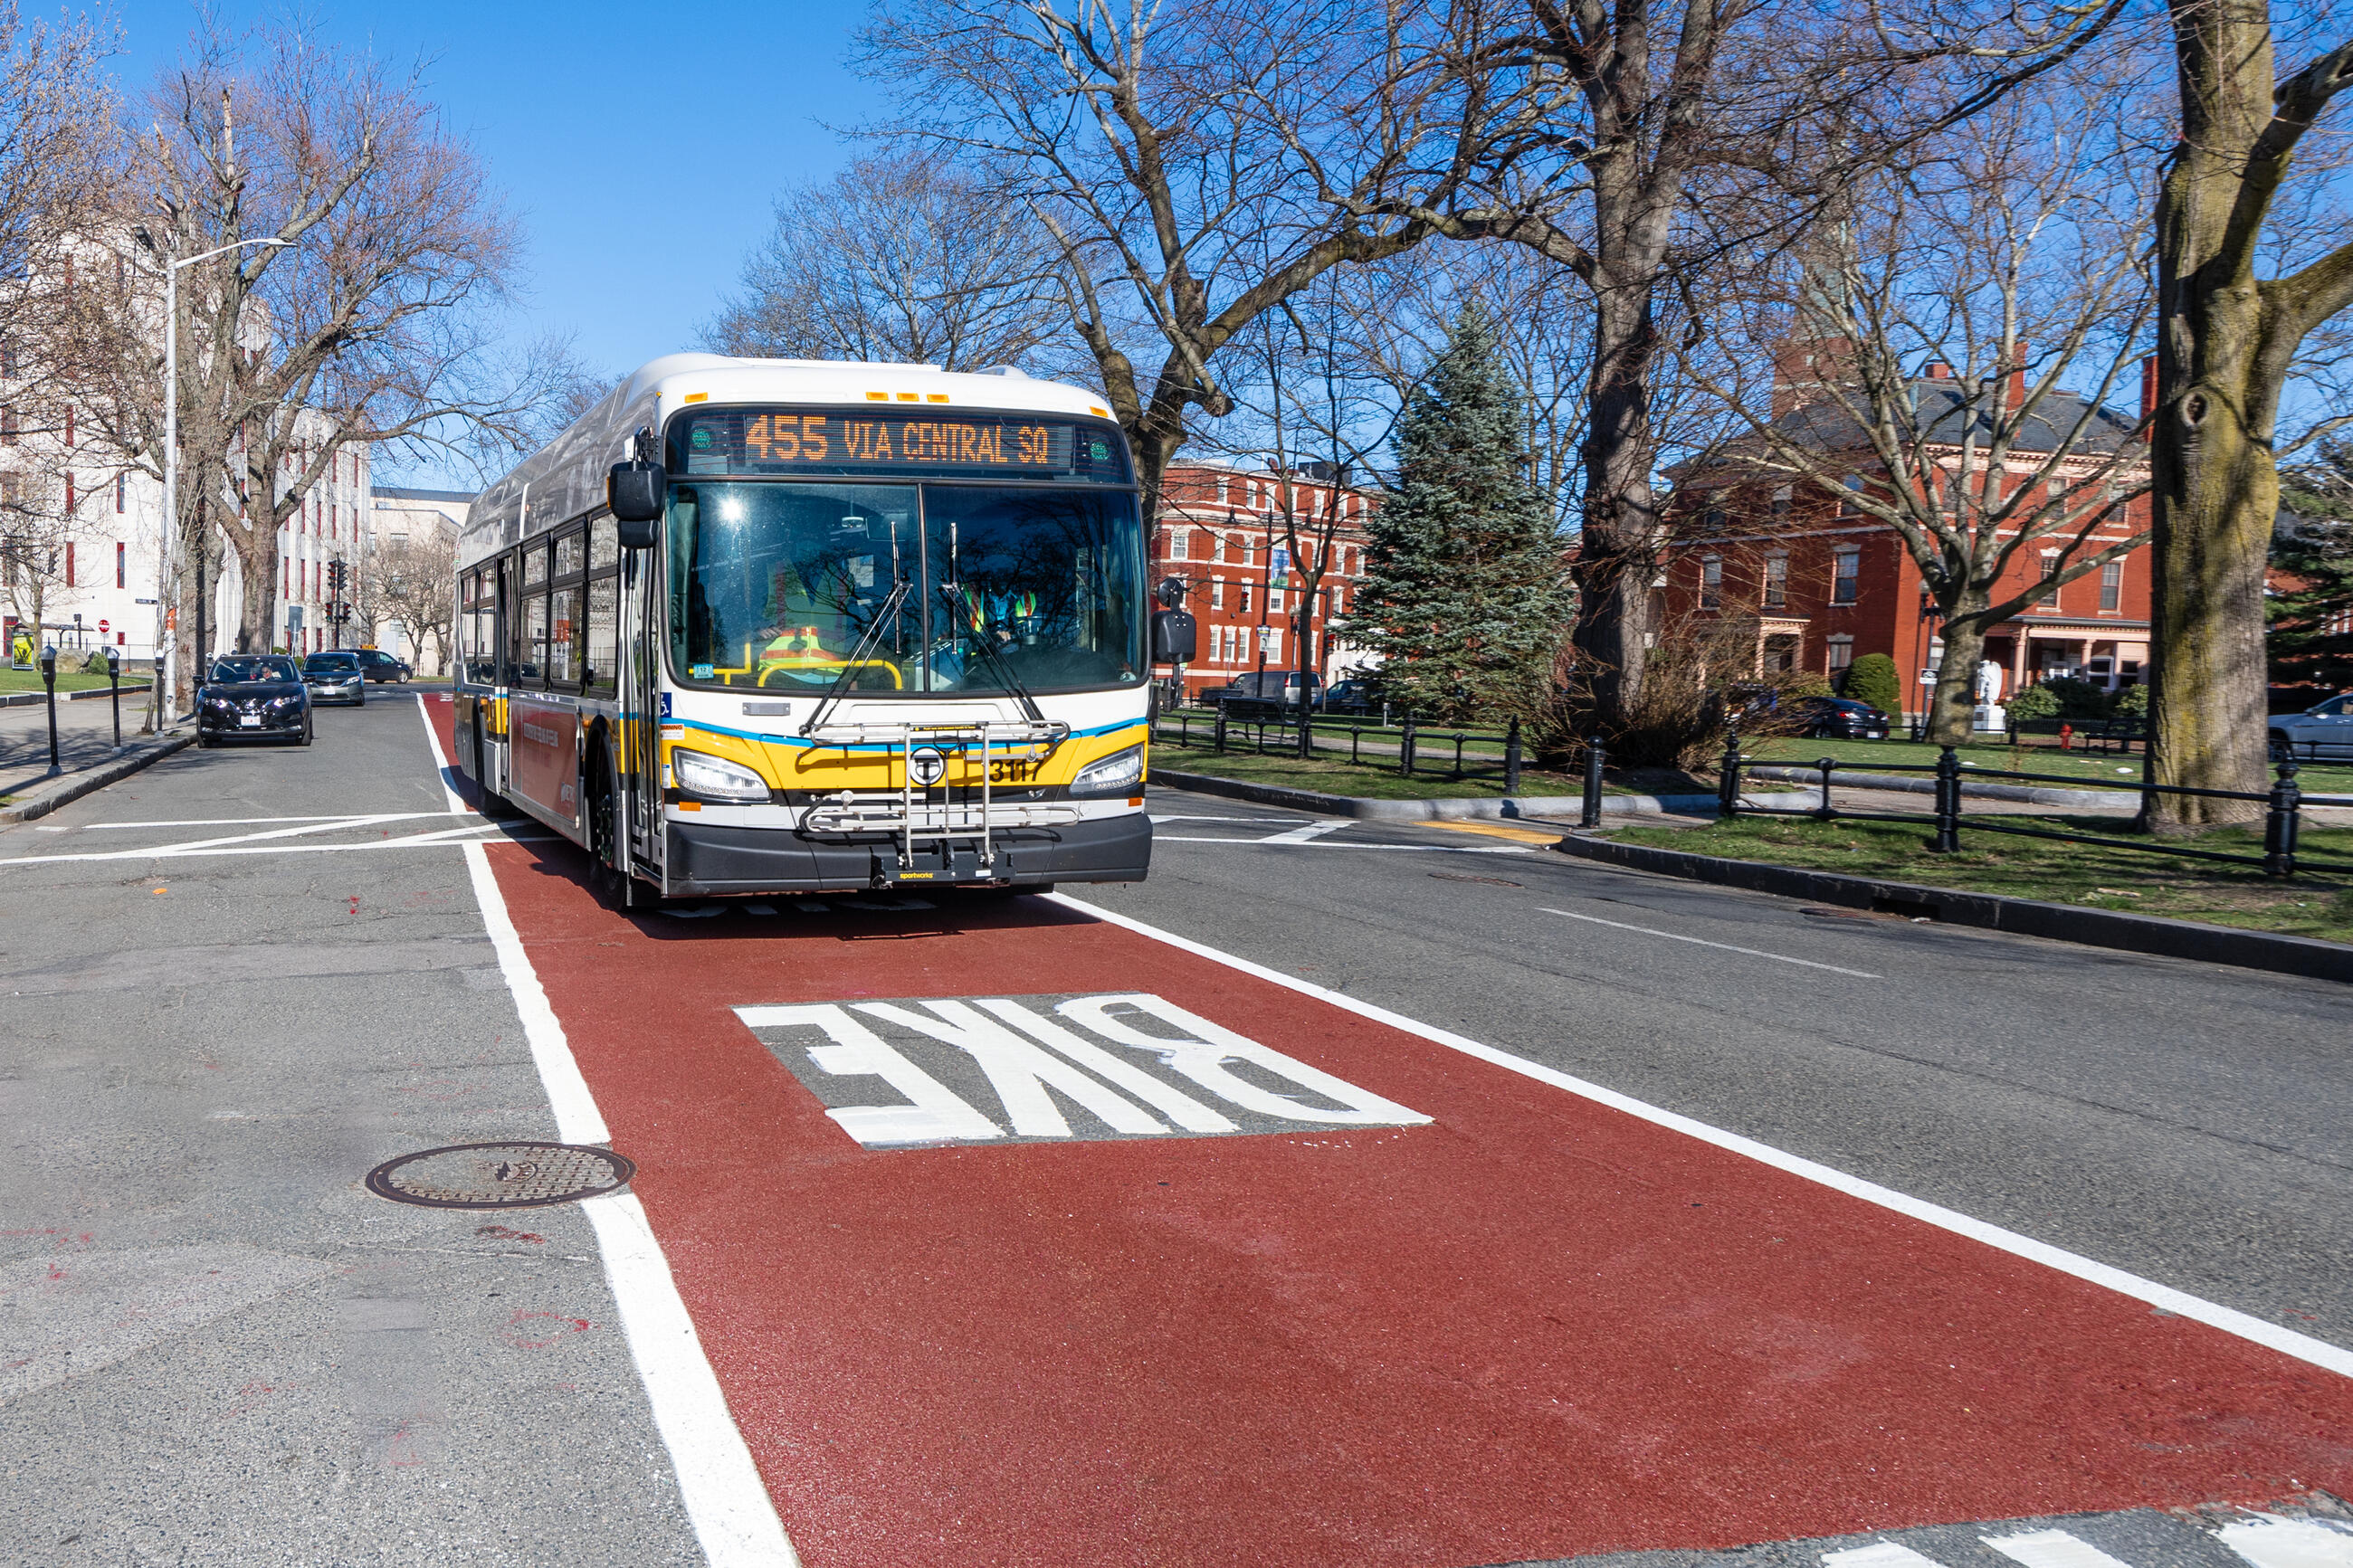 A Route 455 bus travels along the new shared bus-bike lane on North Common St in Lynn, which was completed in partnership with the City of Lynn in 2021. 